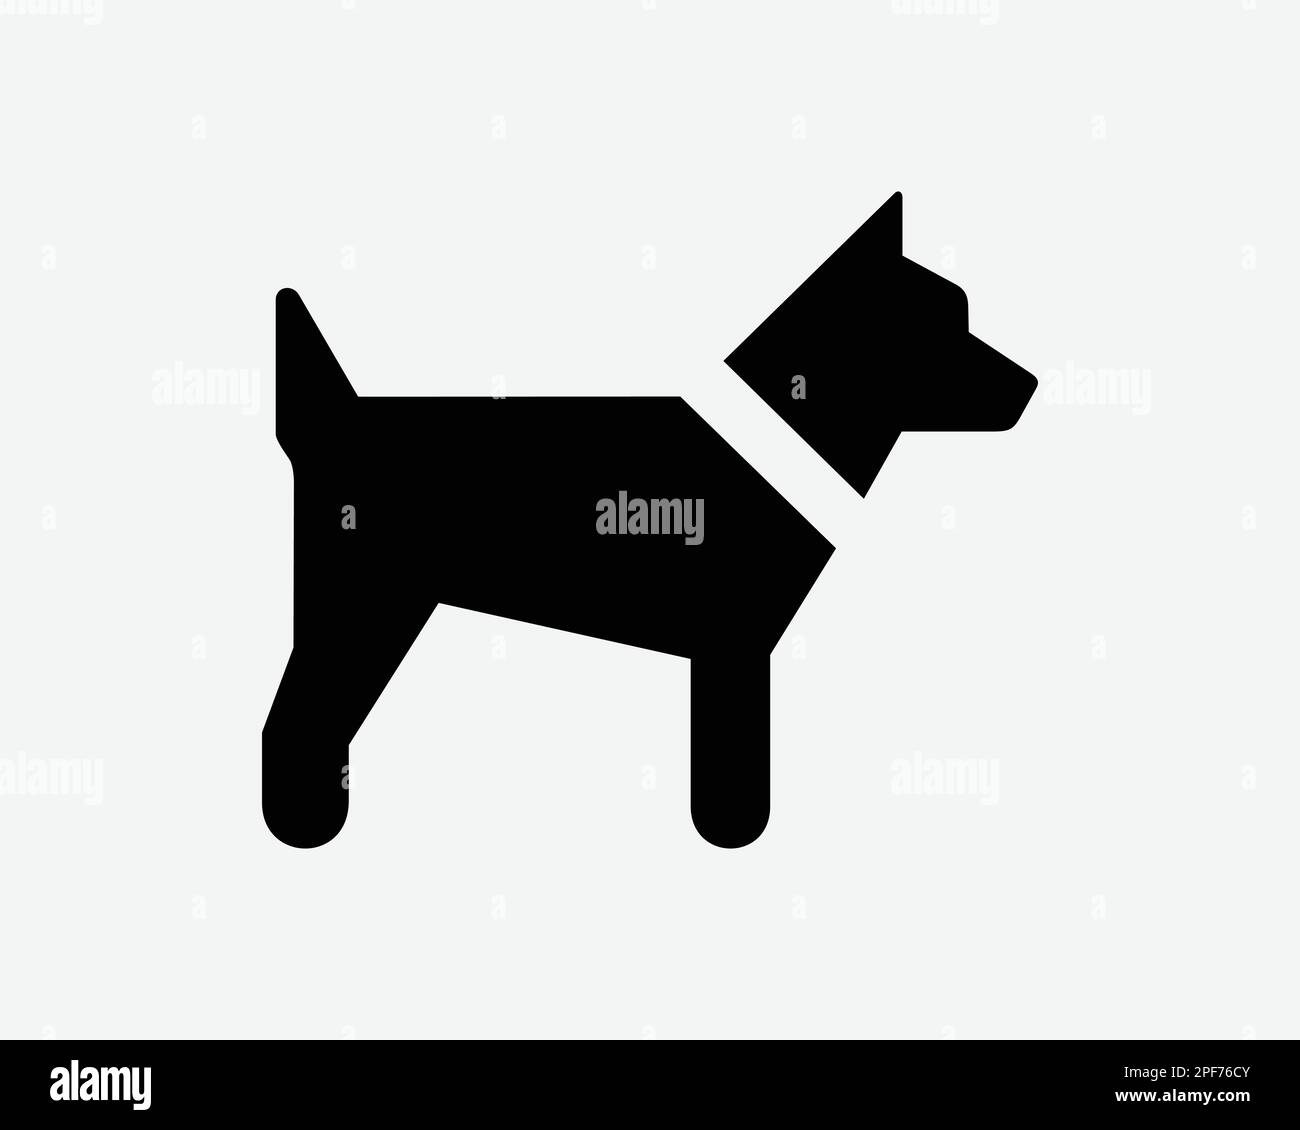 Dog Icon Puppy Pet Animal Cute Canine Side View Pup Doggy Black White Silhouette Symbol Sign Graphic Clipart Artwork Illustration Pictogram Vector Stock Vector